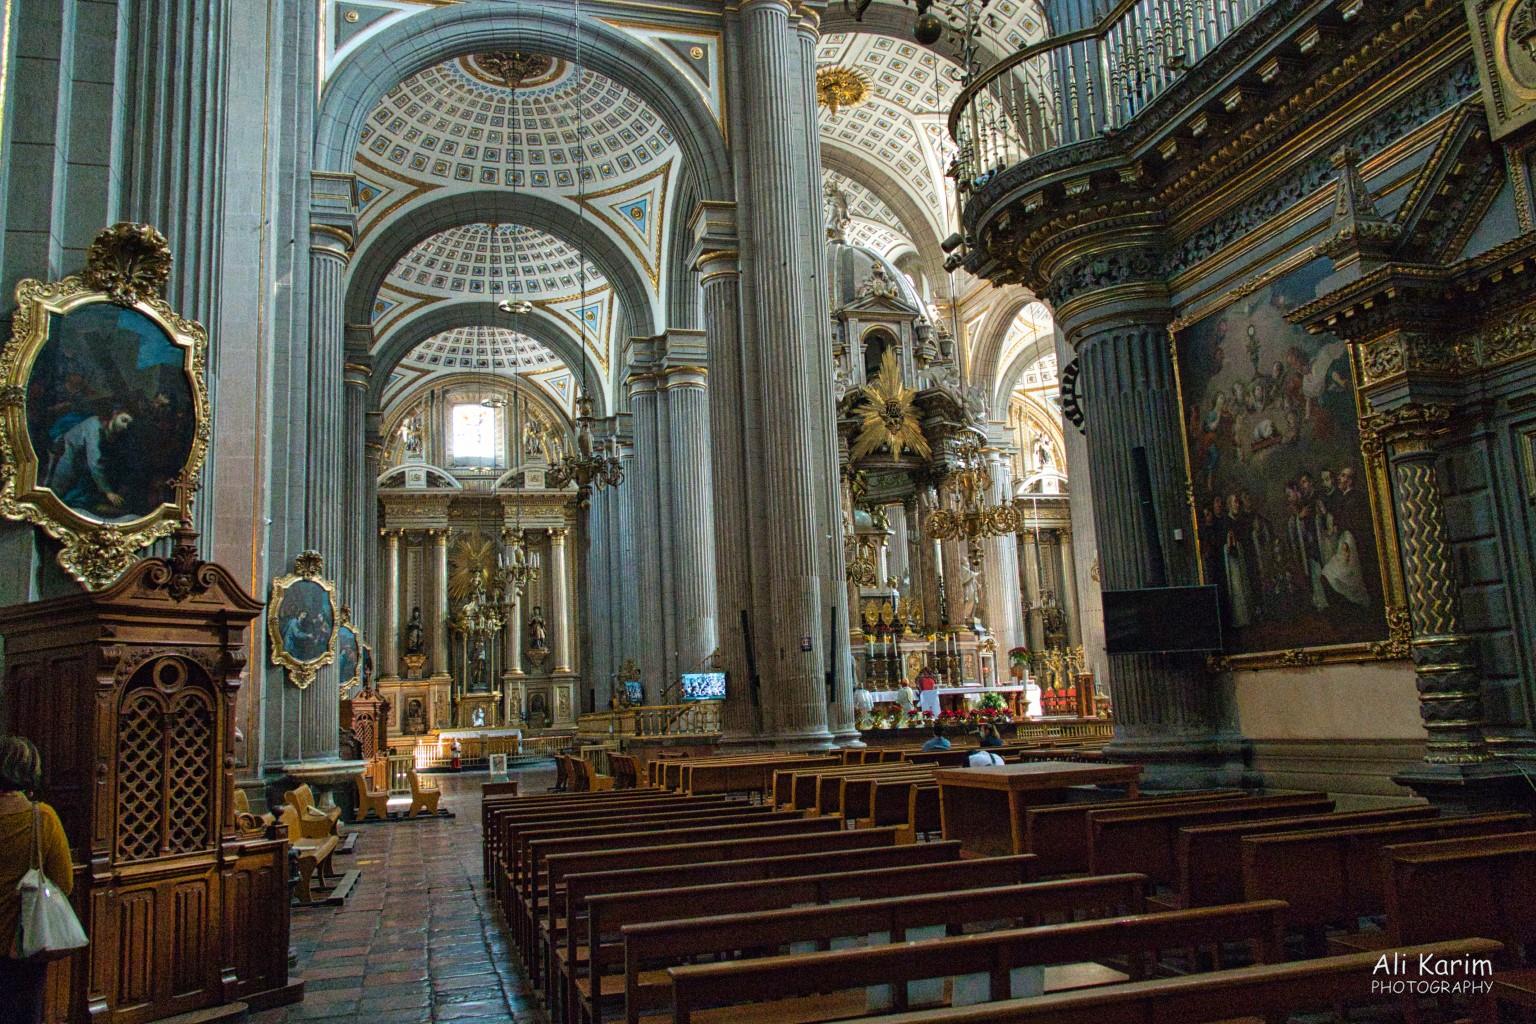 Puebla, Mexico Dec 2020, The interior of the Puebla Cathedral is amazingly beautiful and ornate